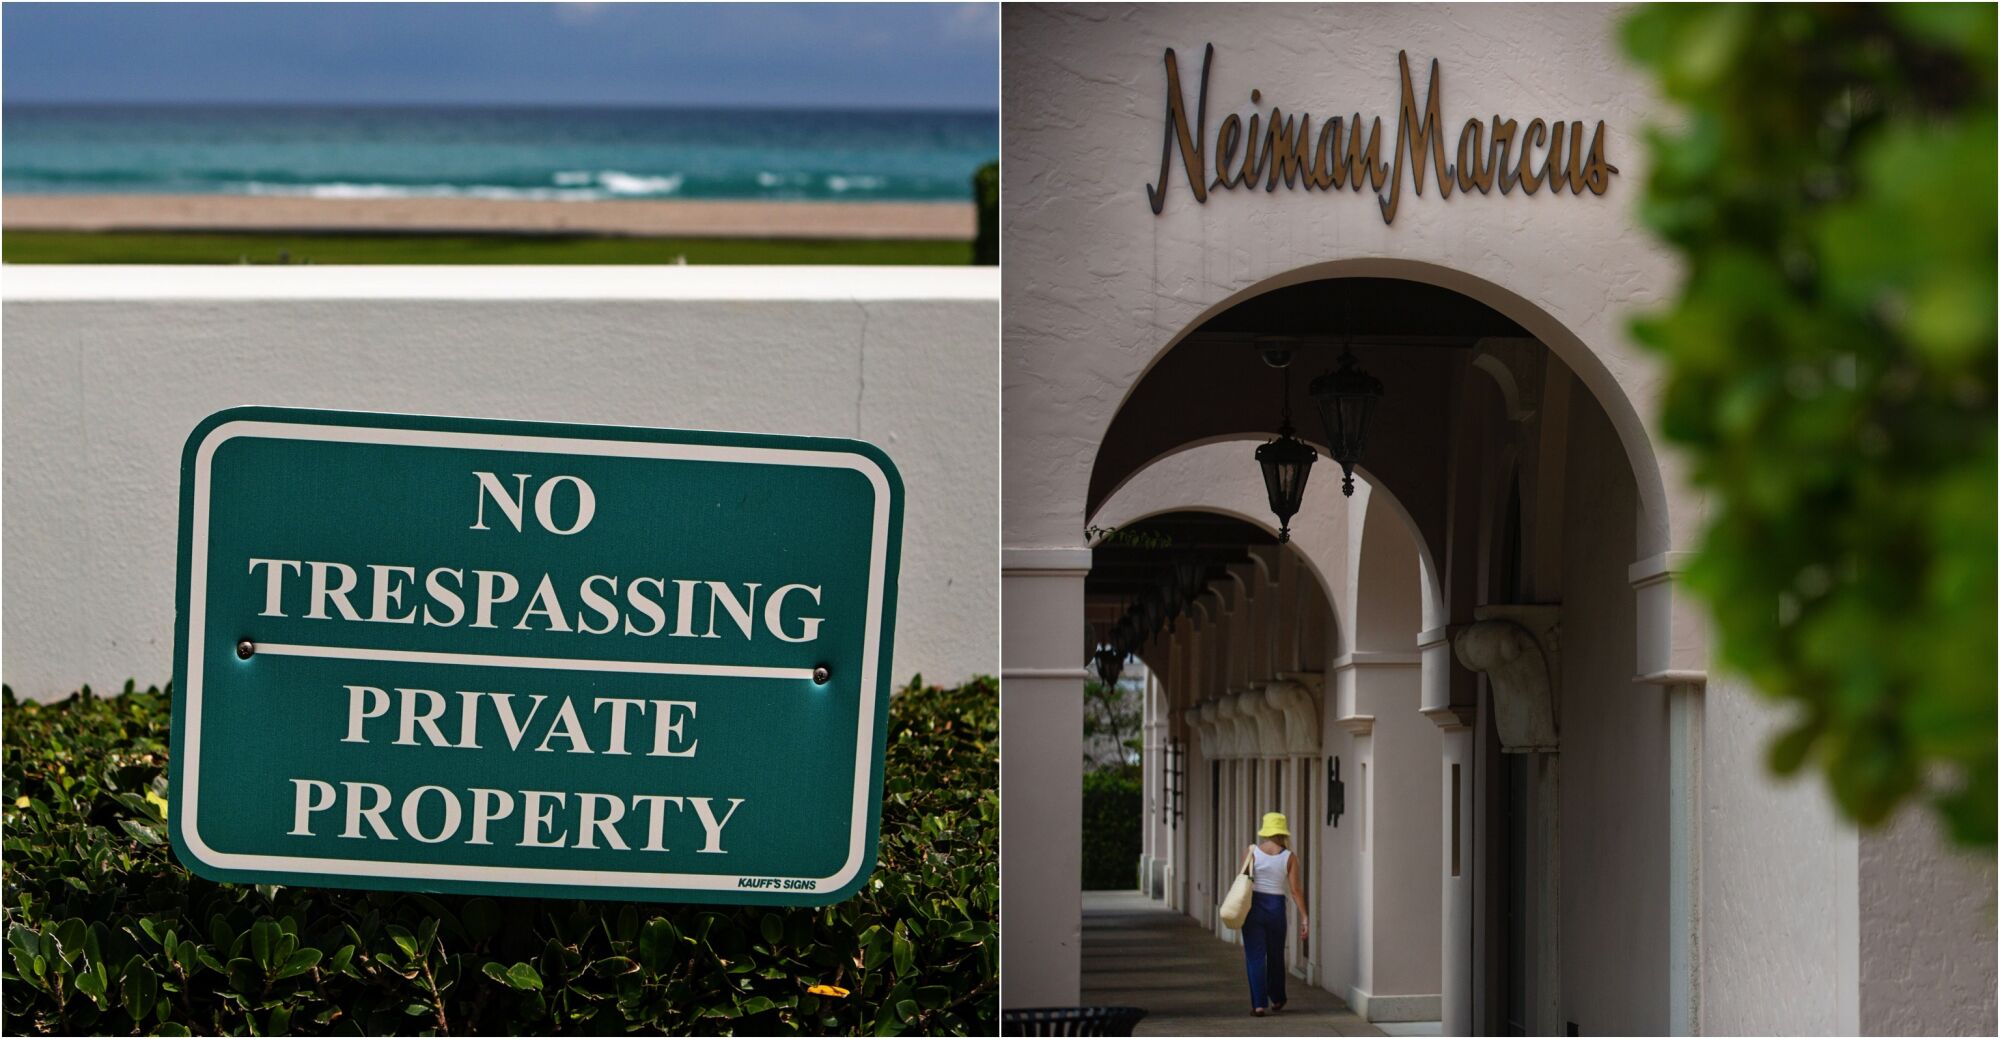 At left, a sign near a wall by the beach reads "No trespassing / Private property." At right, a closed Neiman Marcus store.